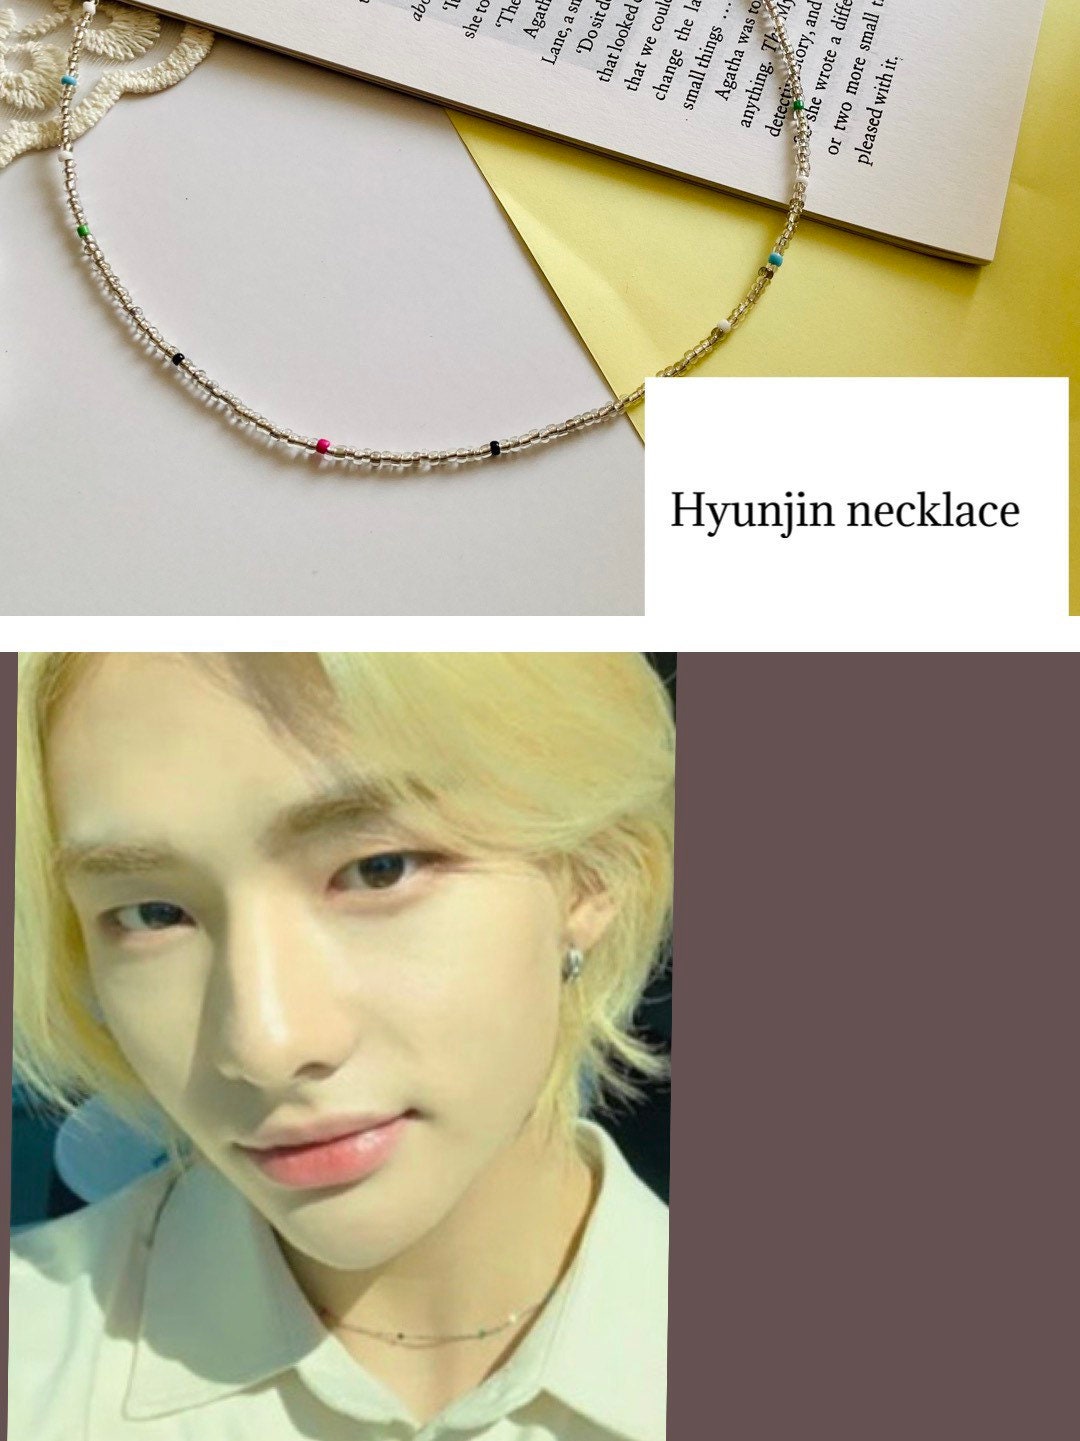 Stray Kids Social Path Inspired Necklace, Social Path, Stray Kids 5 Star,  Stray Kids Merch, Kpop Jewelry 